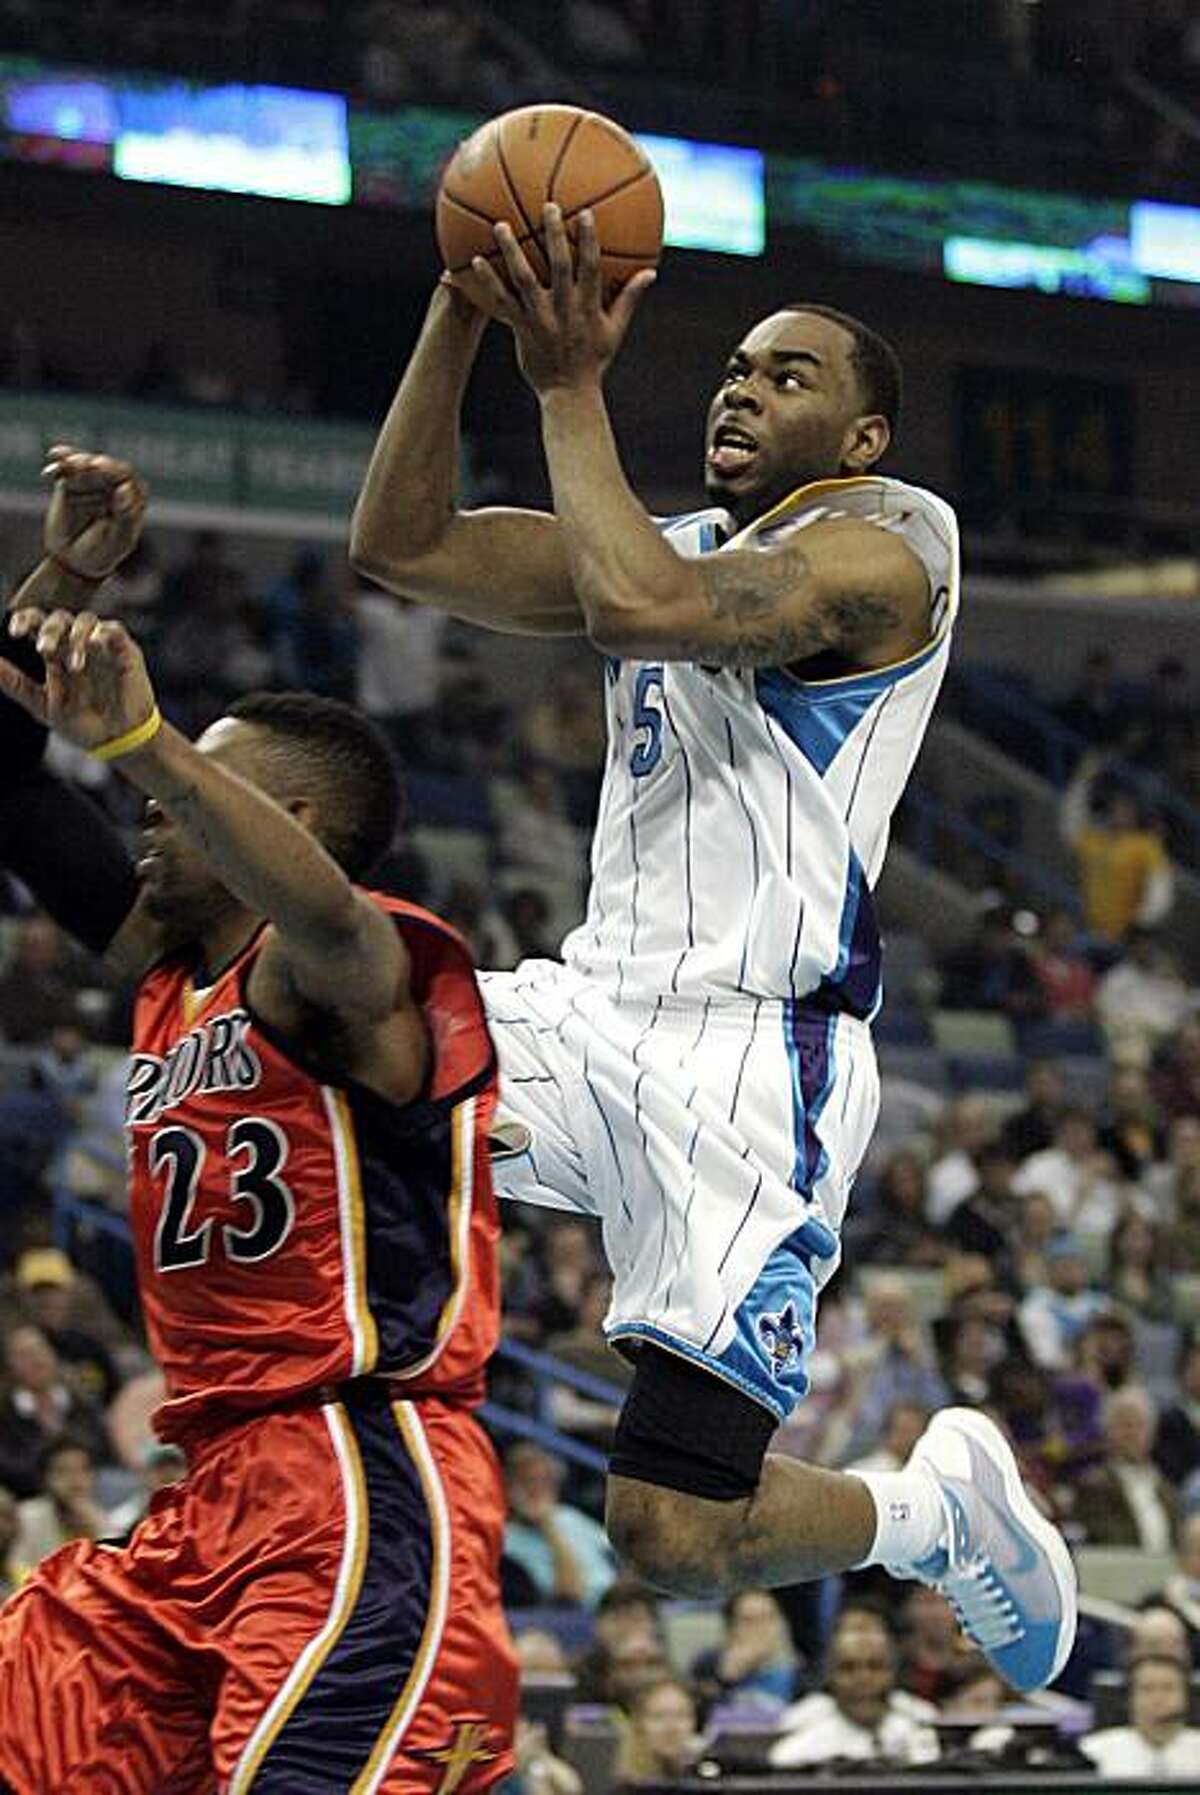 New Orleans Hornets guard Marcus Thornton (5) goes up for a shot over Golden State Warriors guard C.J. Watson (23) during the first half of an NBA basketball game in New Orleans, Monday, March 8, 2010.